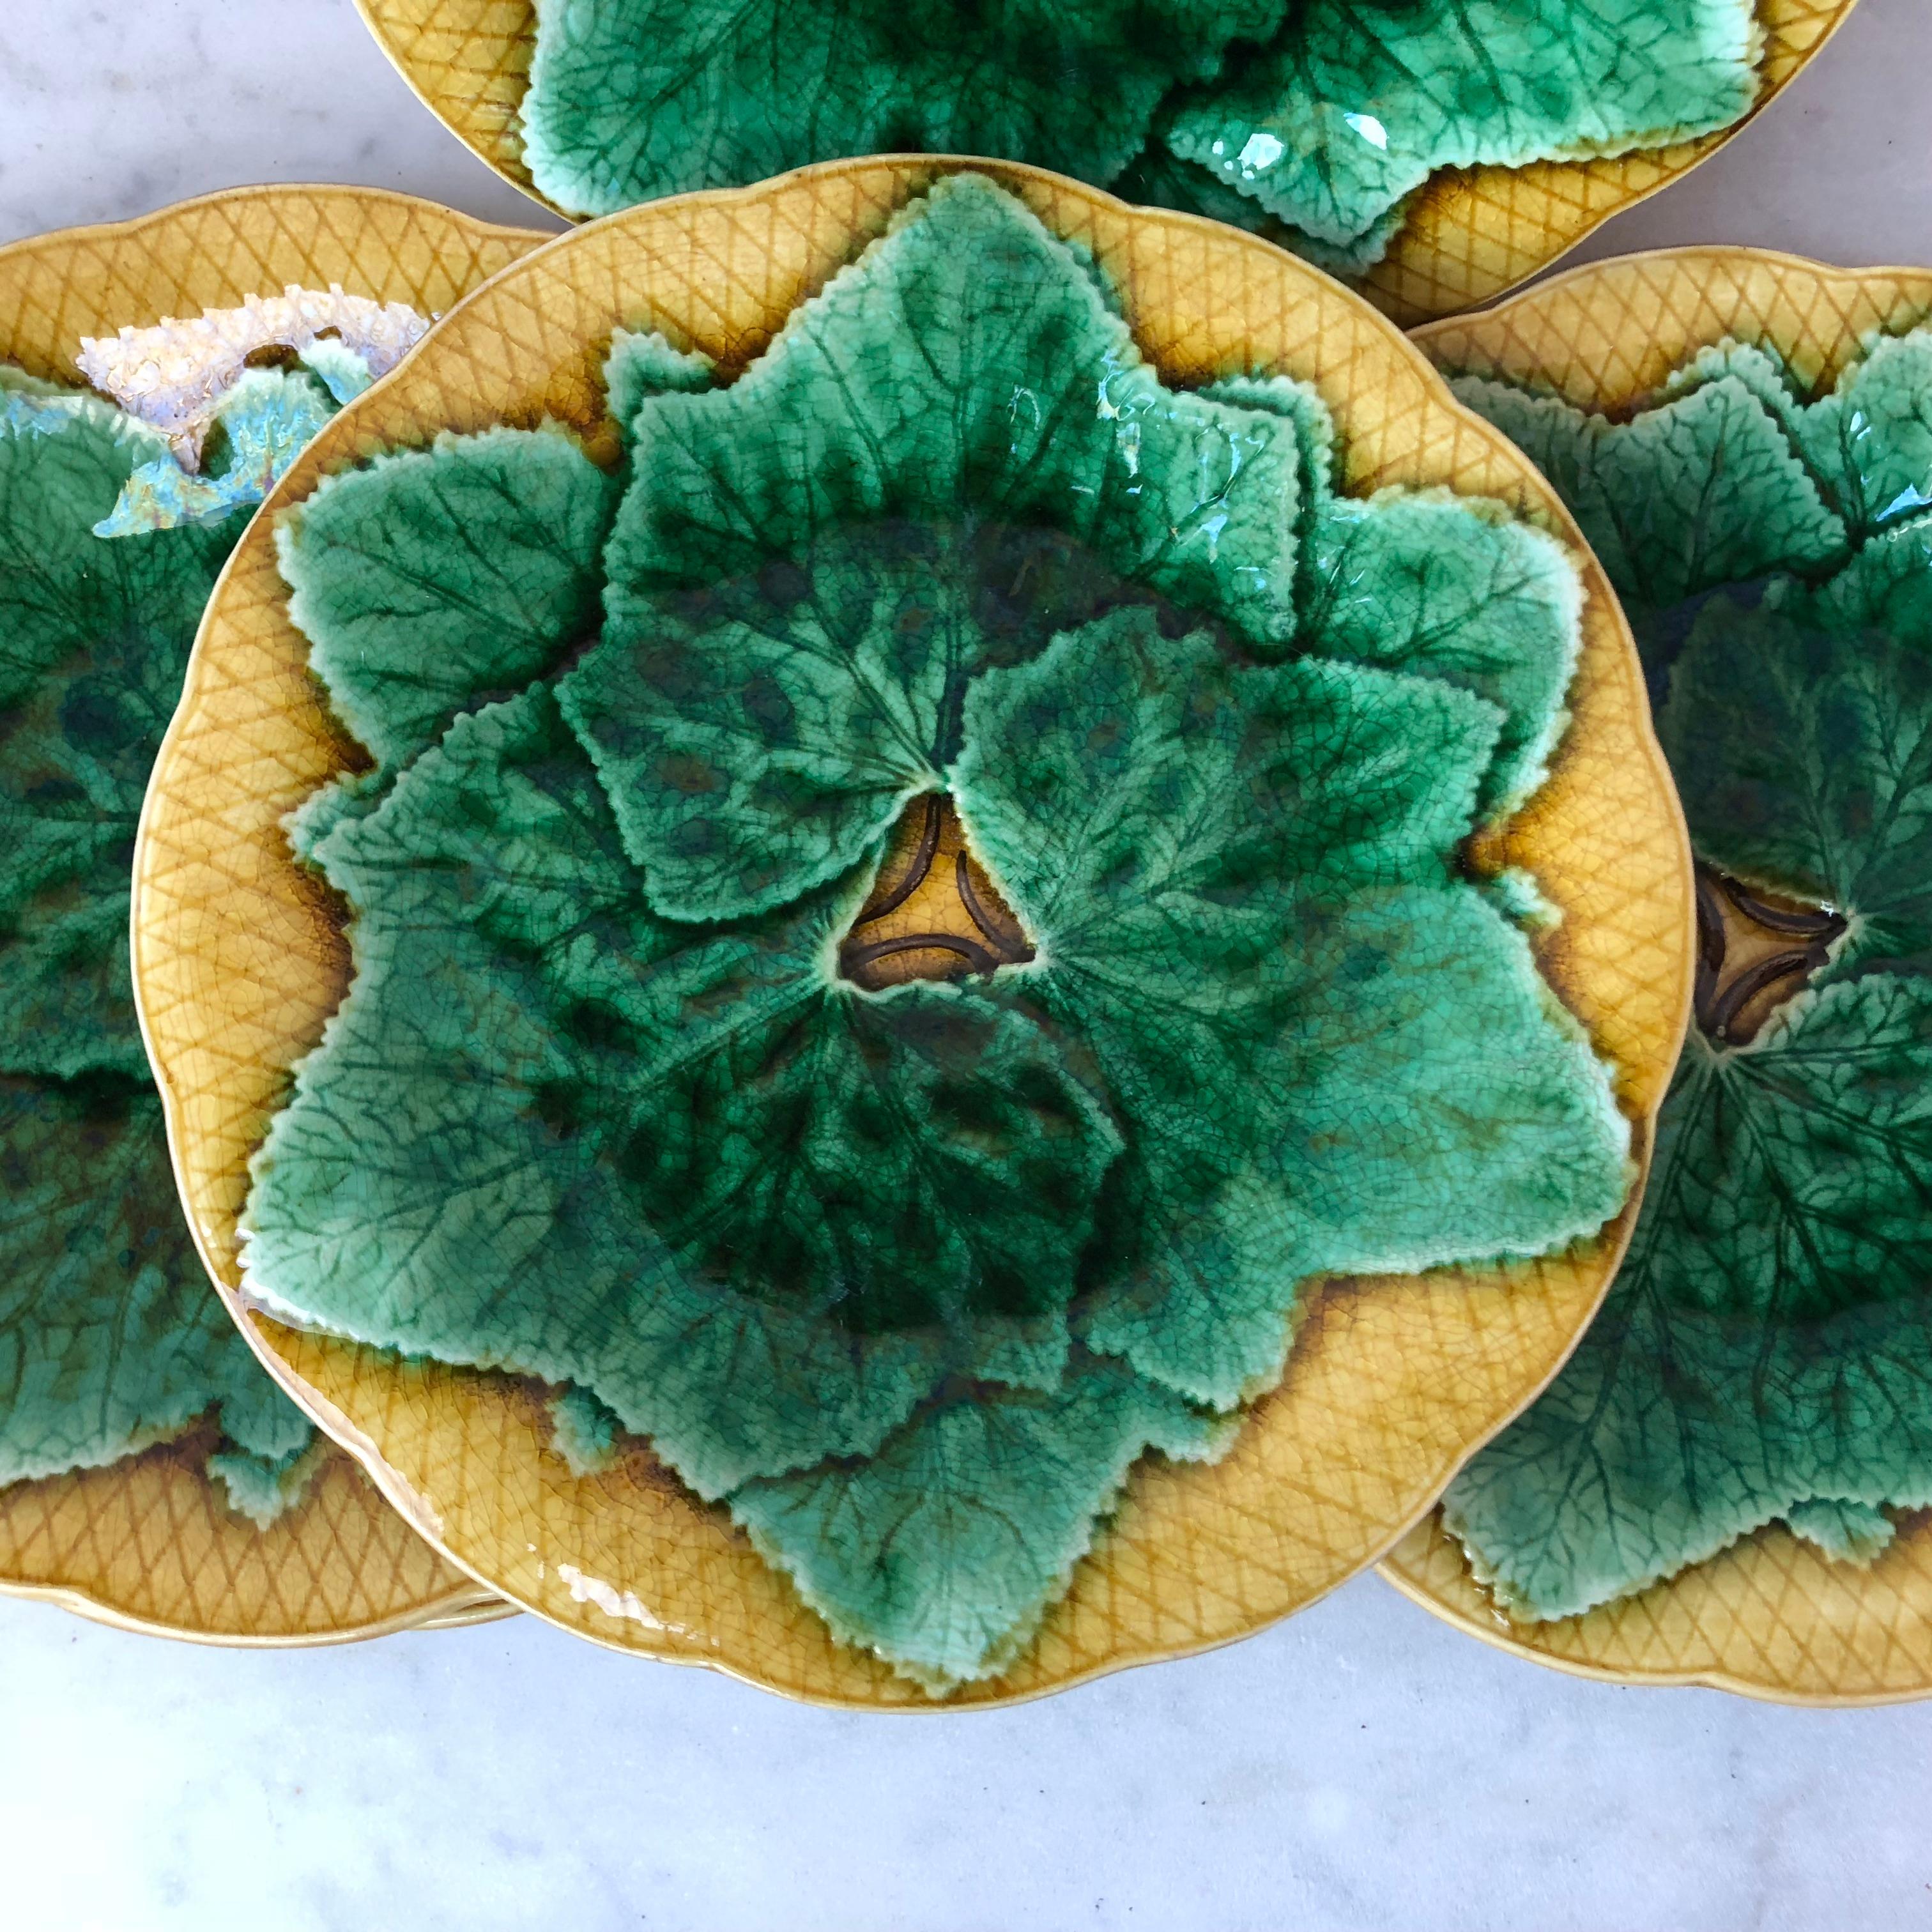 French Majolica leaves plate Gien, circa 1880.
Green leaves on a yellow background basketweave.